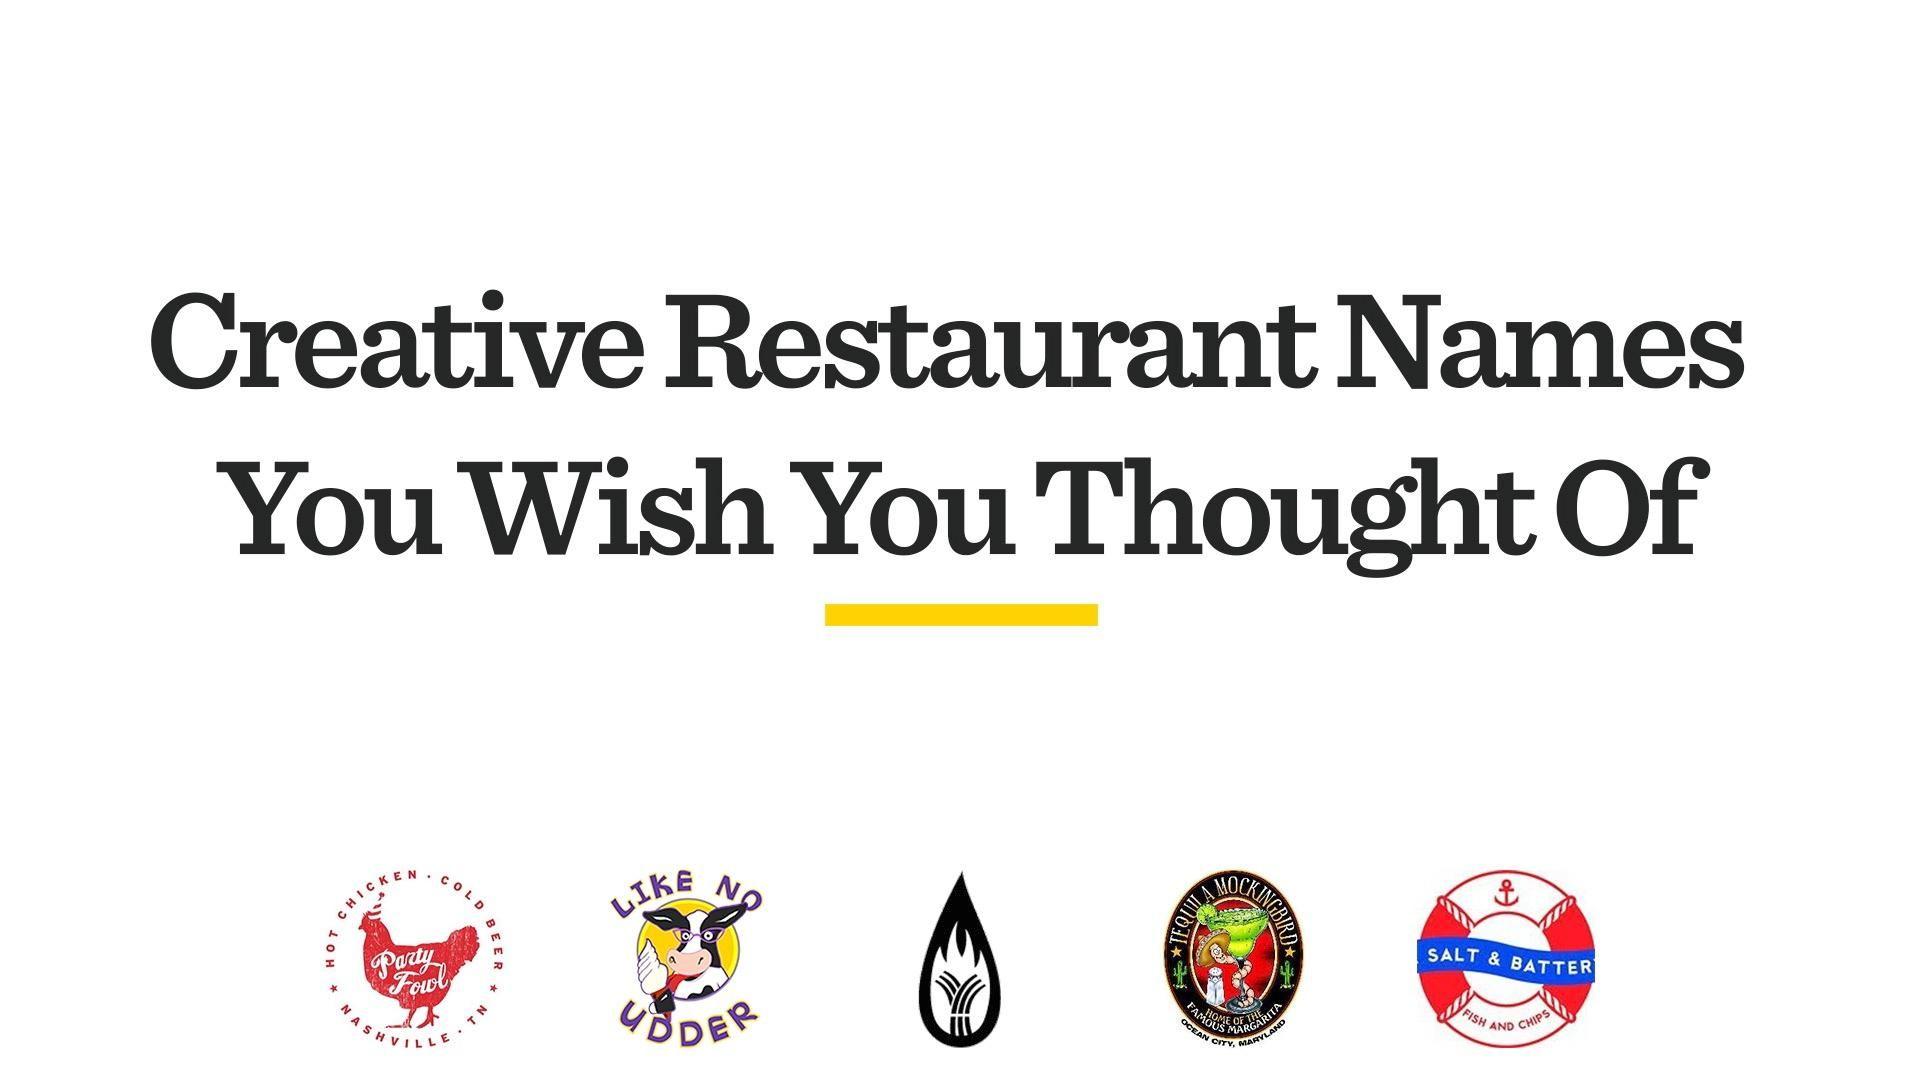 Uncommon Restaurant Logo - 10 Creative Restaurant Names You'll Wish You Thought Of